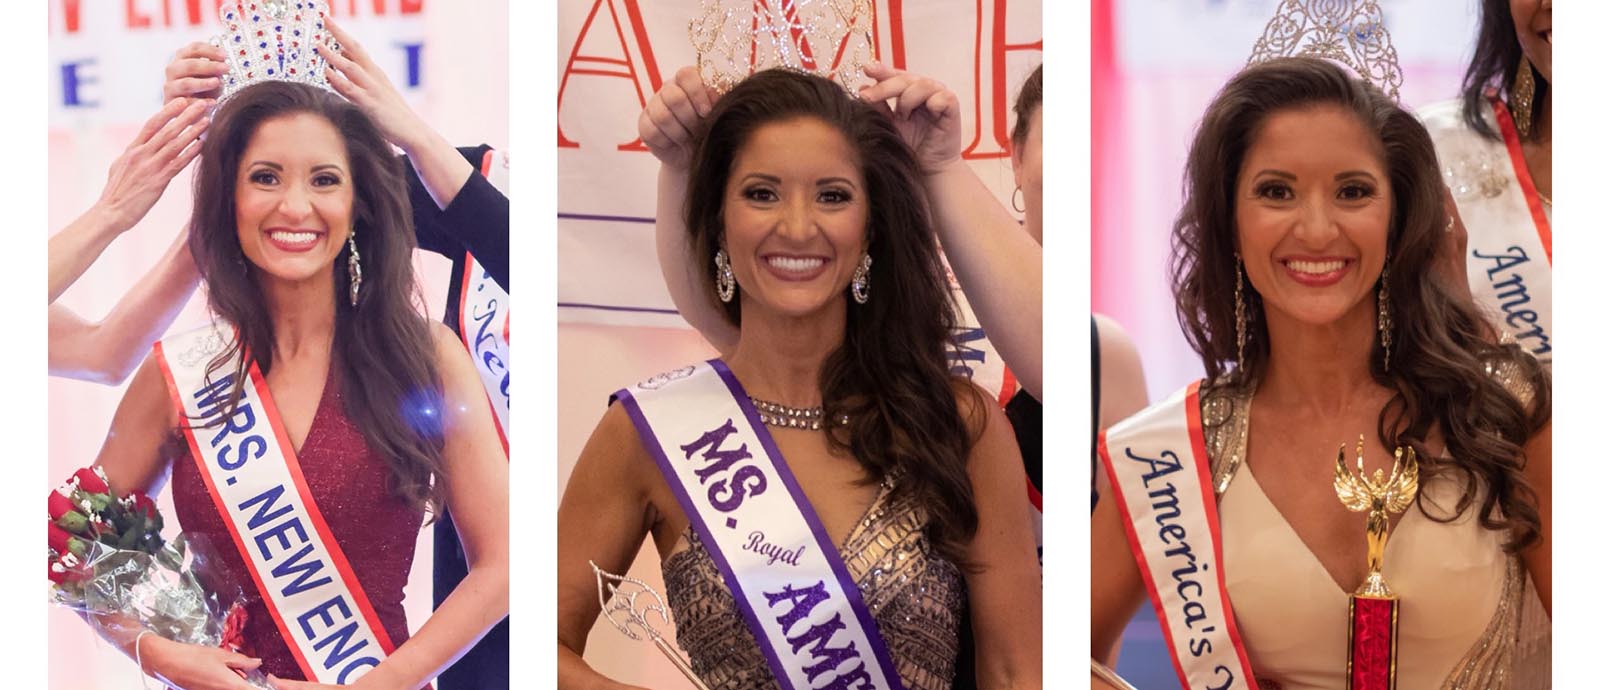 Images of Kate being crowned at three different pageants